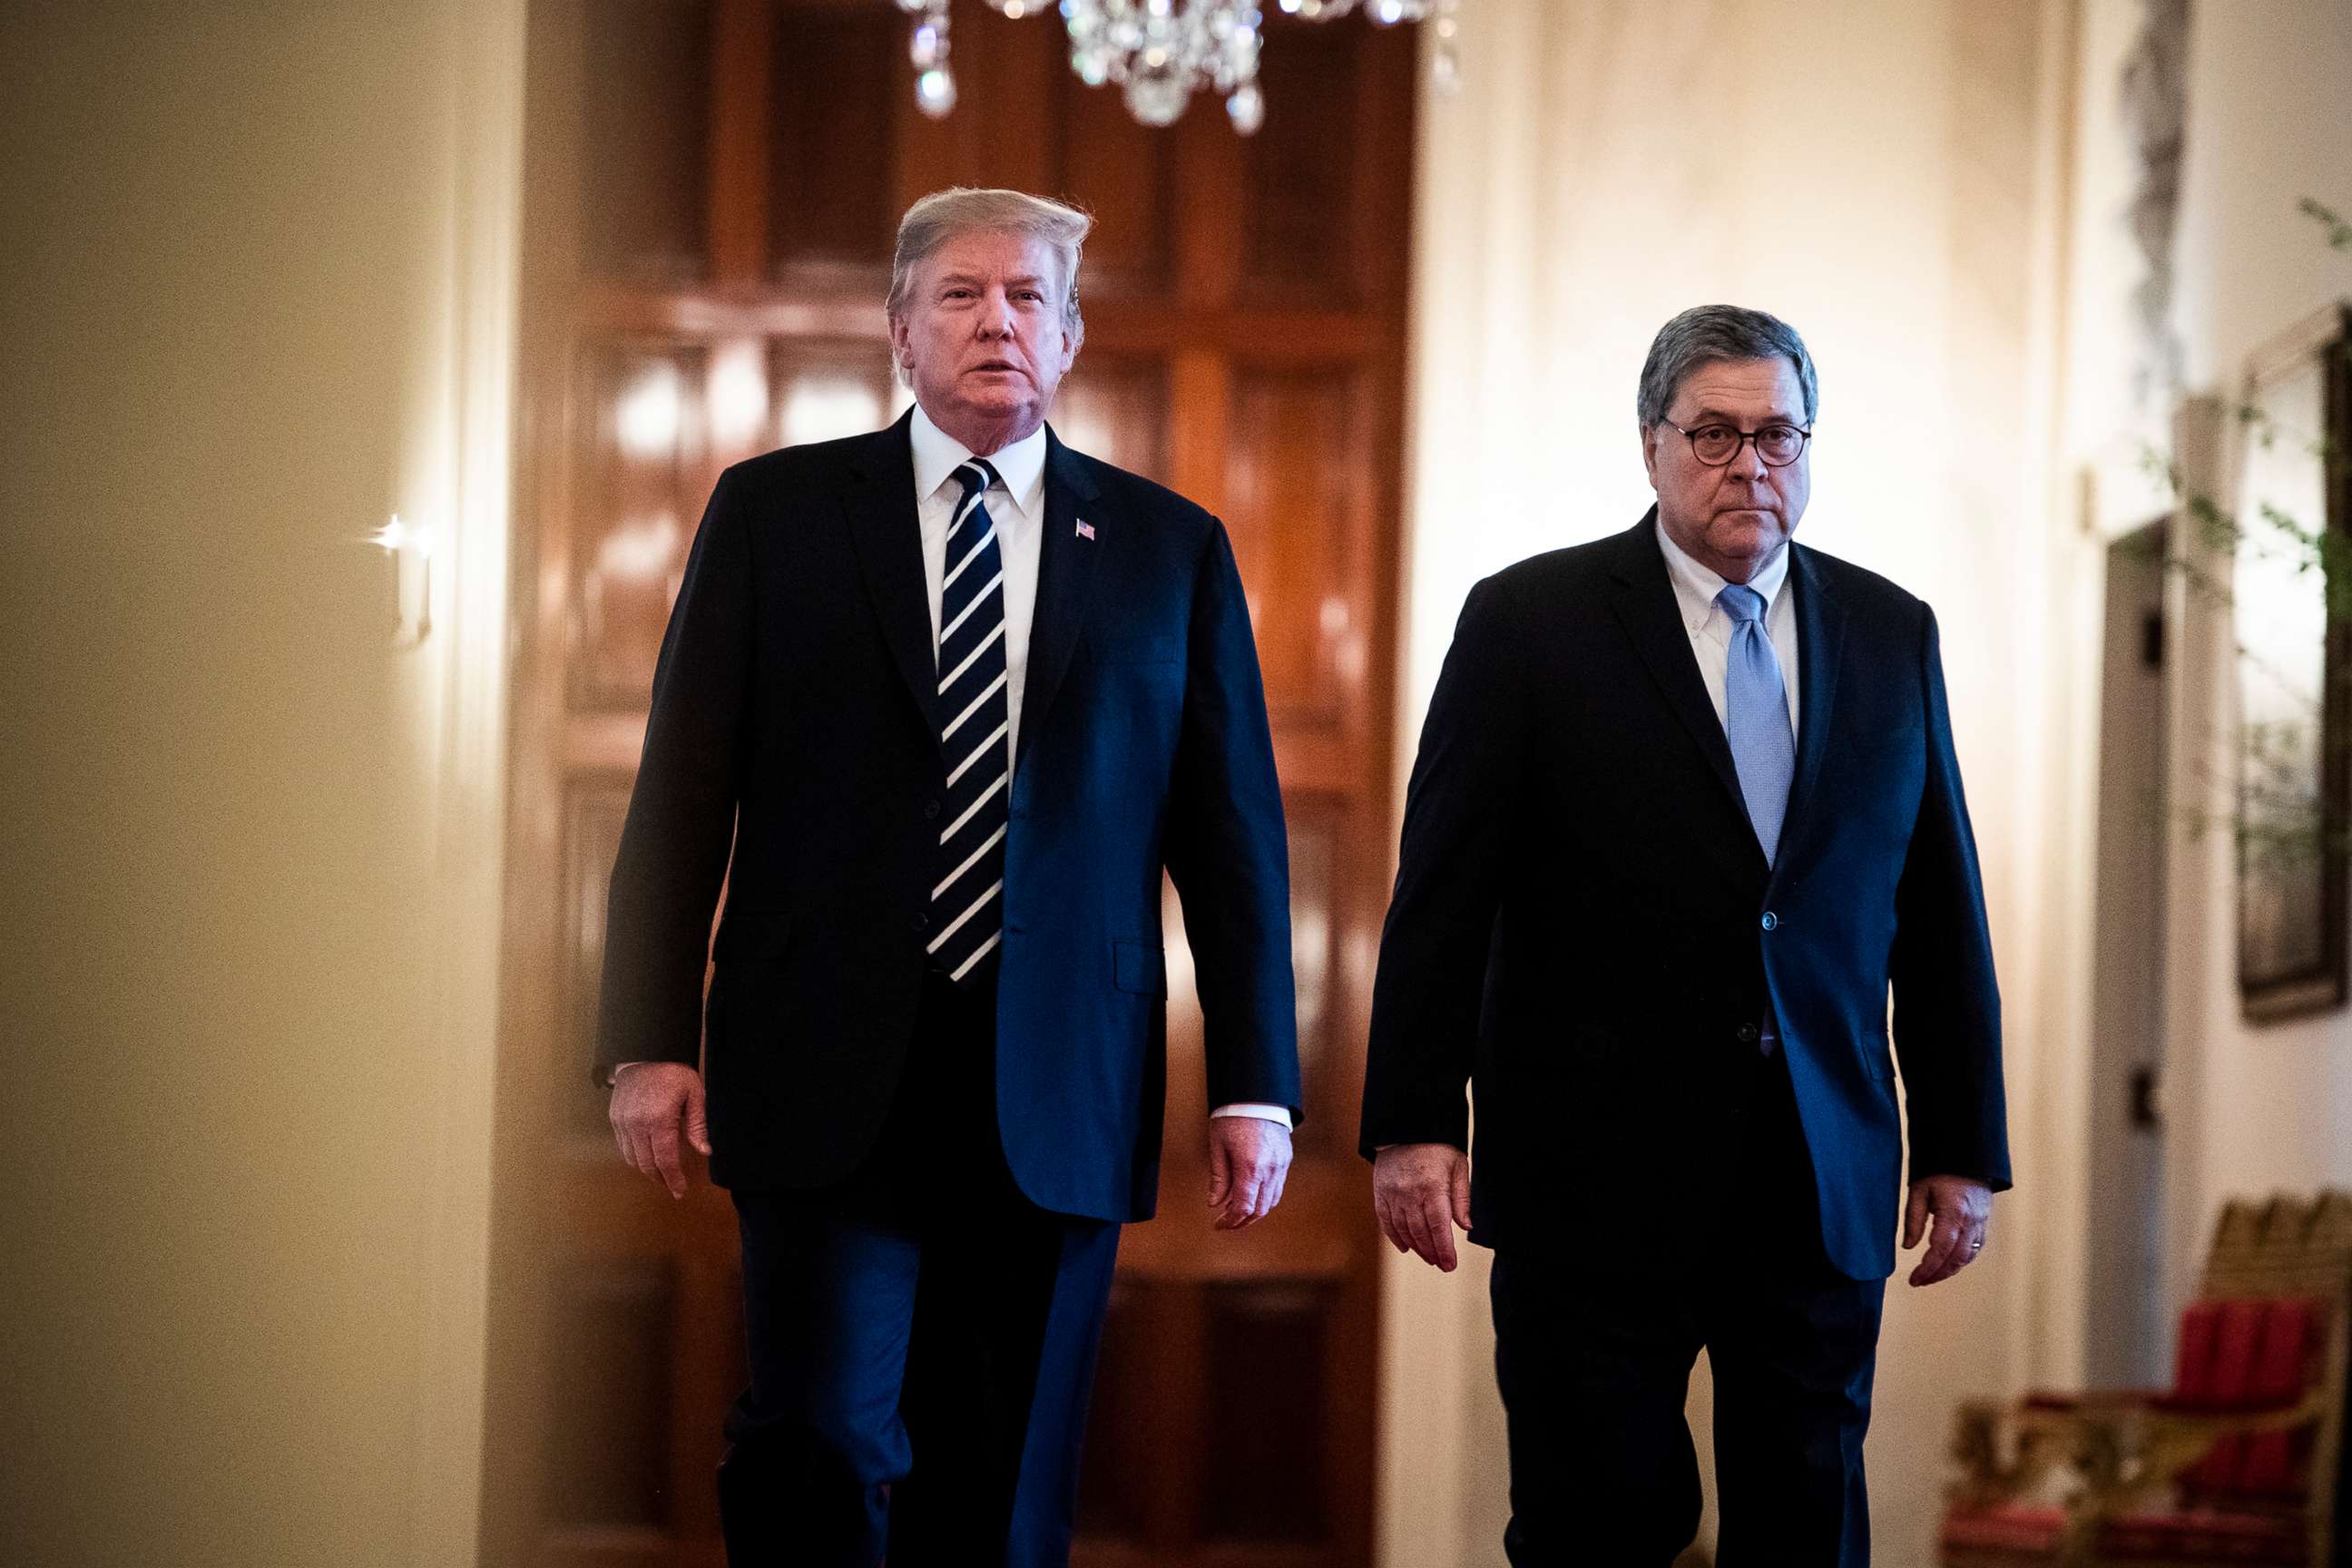 PHOTO: In this May 22, 2019, file photo, President Donald J. Trump and Attorney General William Barr arrive to participate in a Public Safety Officer Medal of Valor presentation ceremony in the East Room of the White House in Washington, DC.